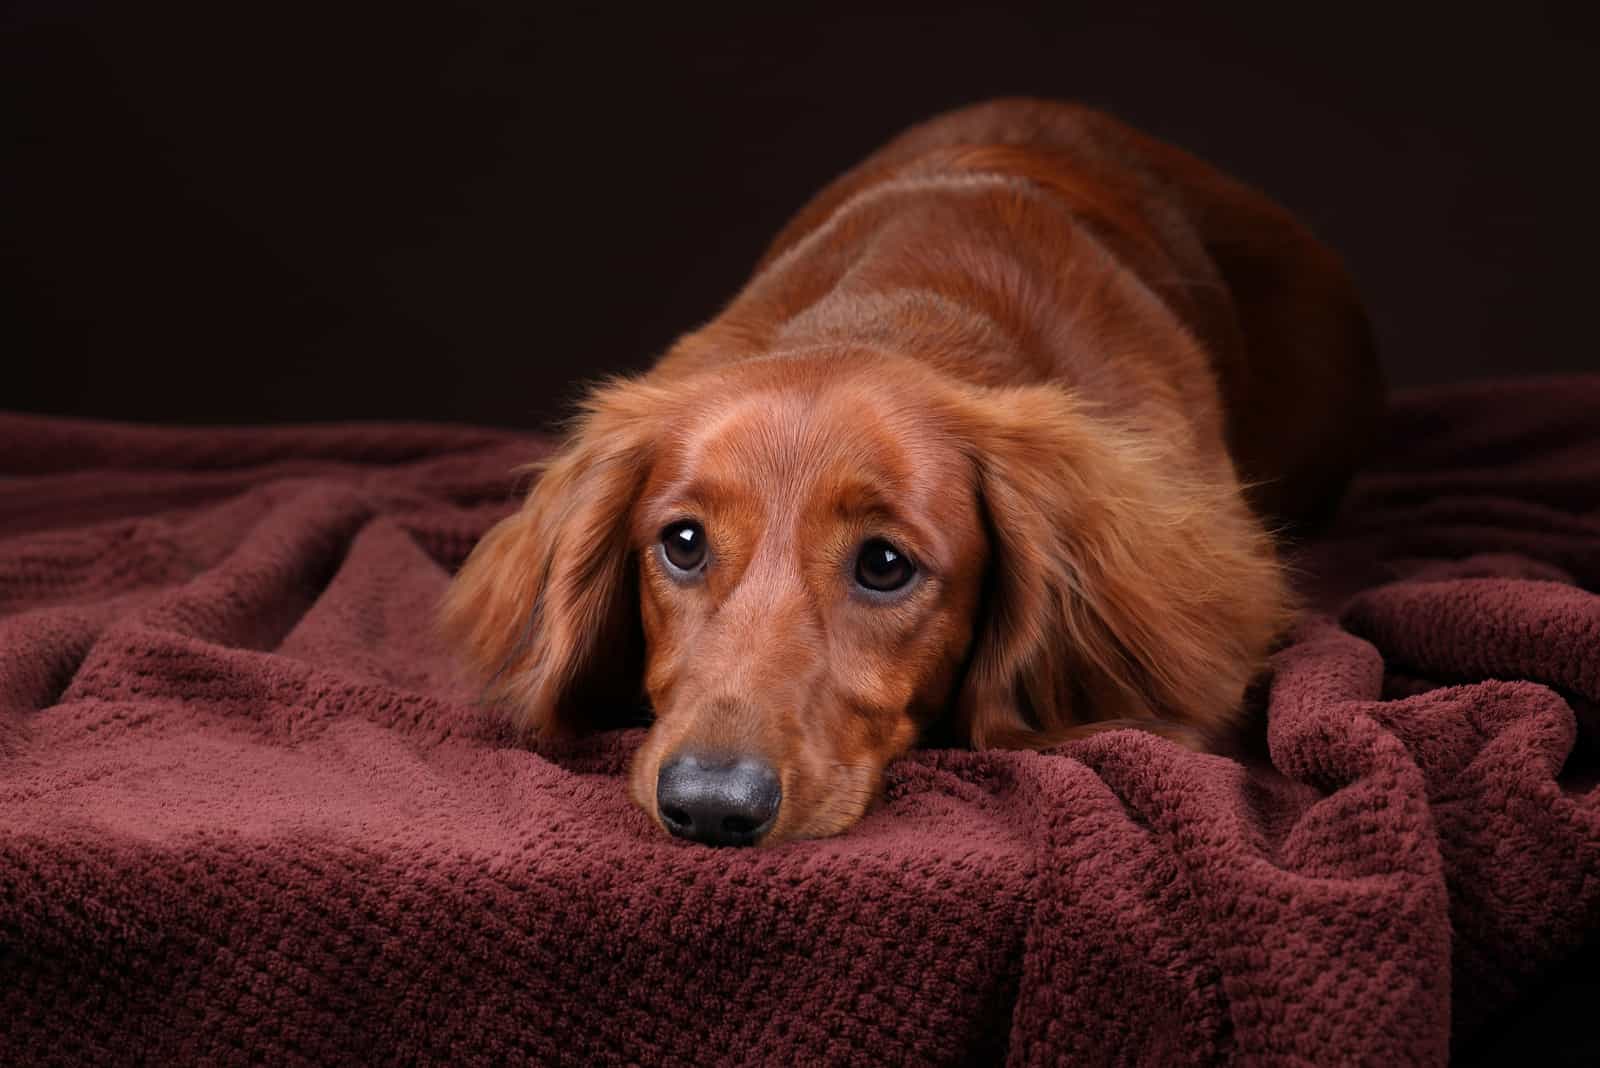 Why Do Dachshunds Shake? The Common Reasons And Remedies